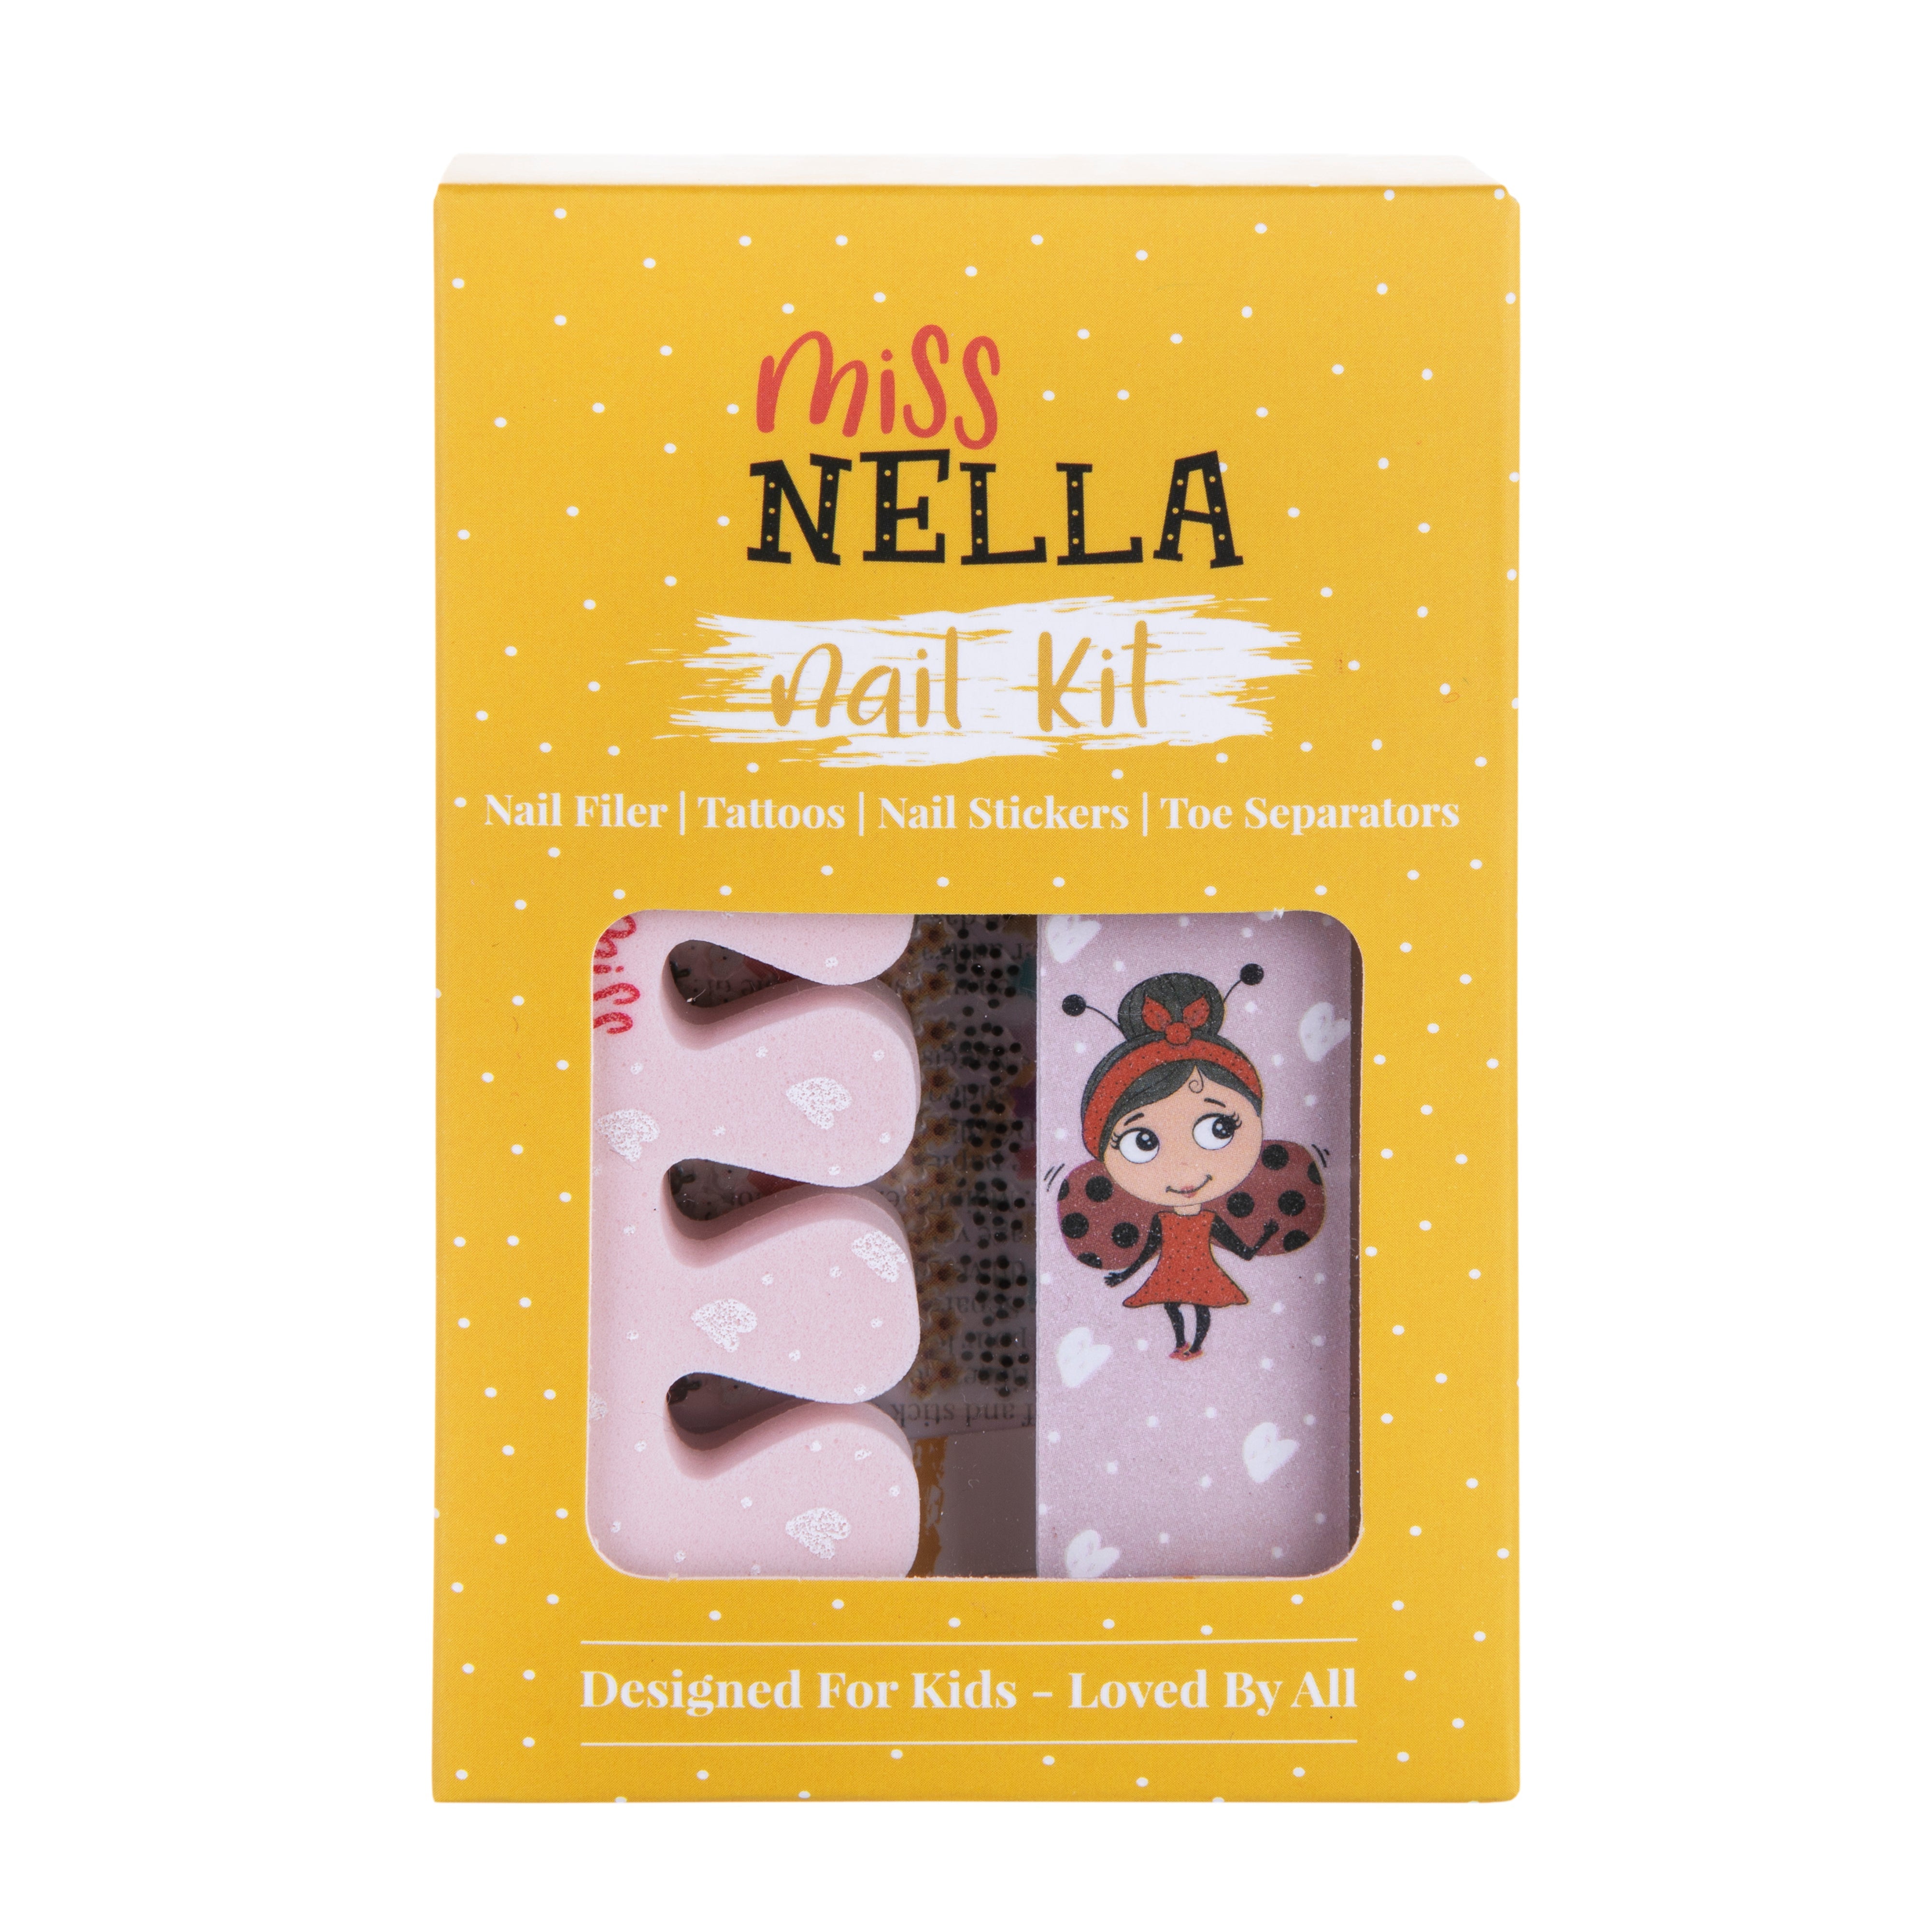 Nails and Accessories Set